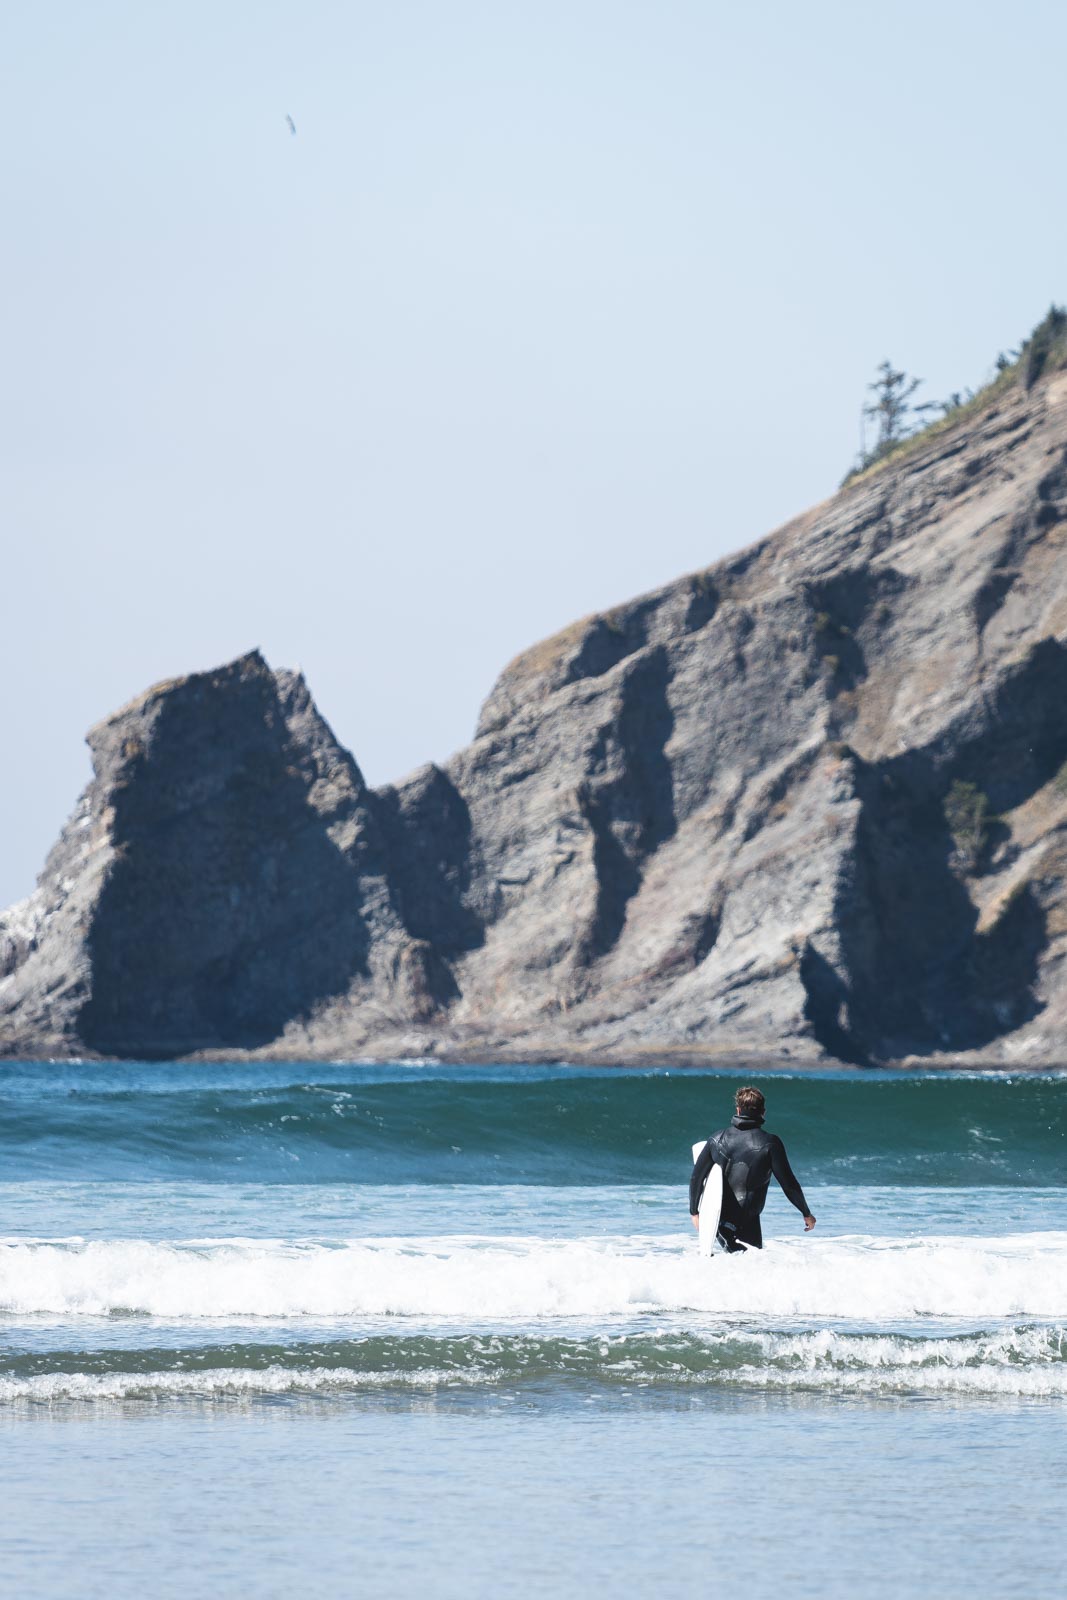 Man holding surfboard in ocean with rocky cliffs in background at Oswald West State Park